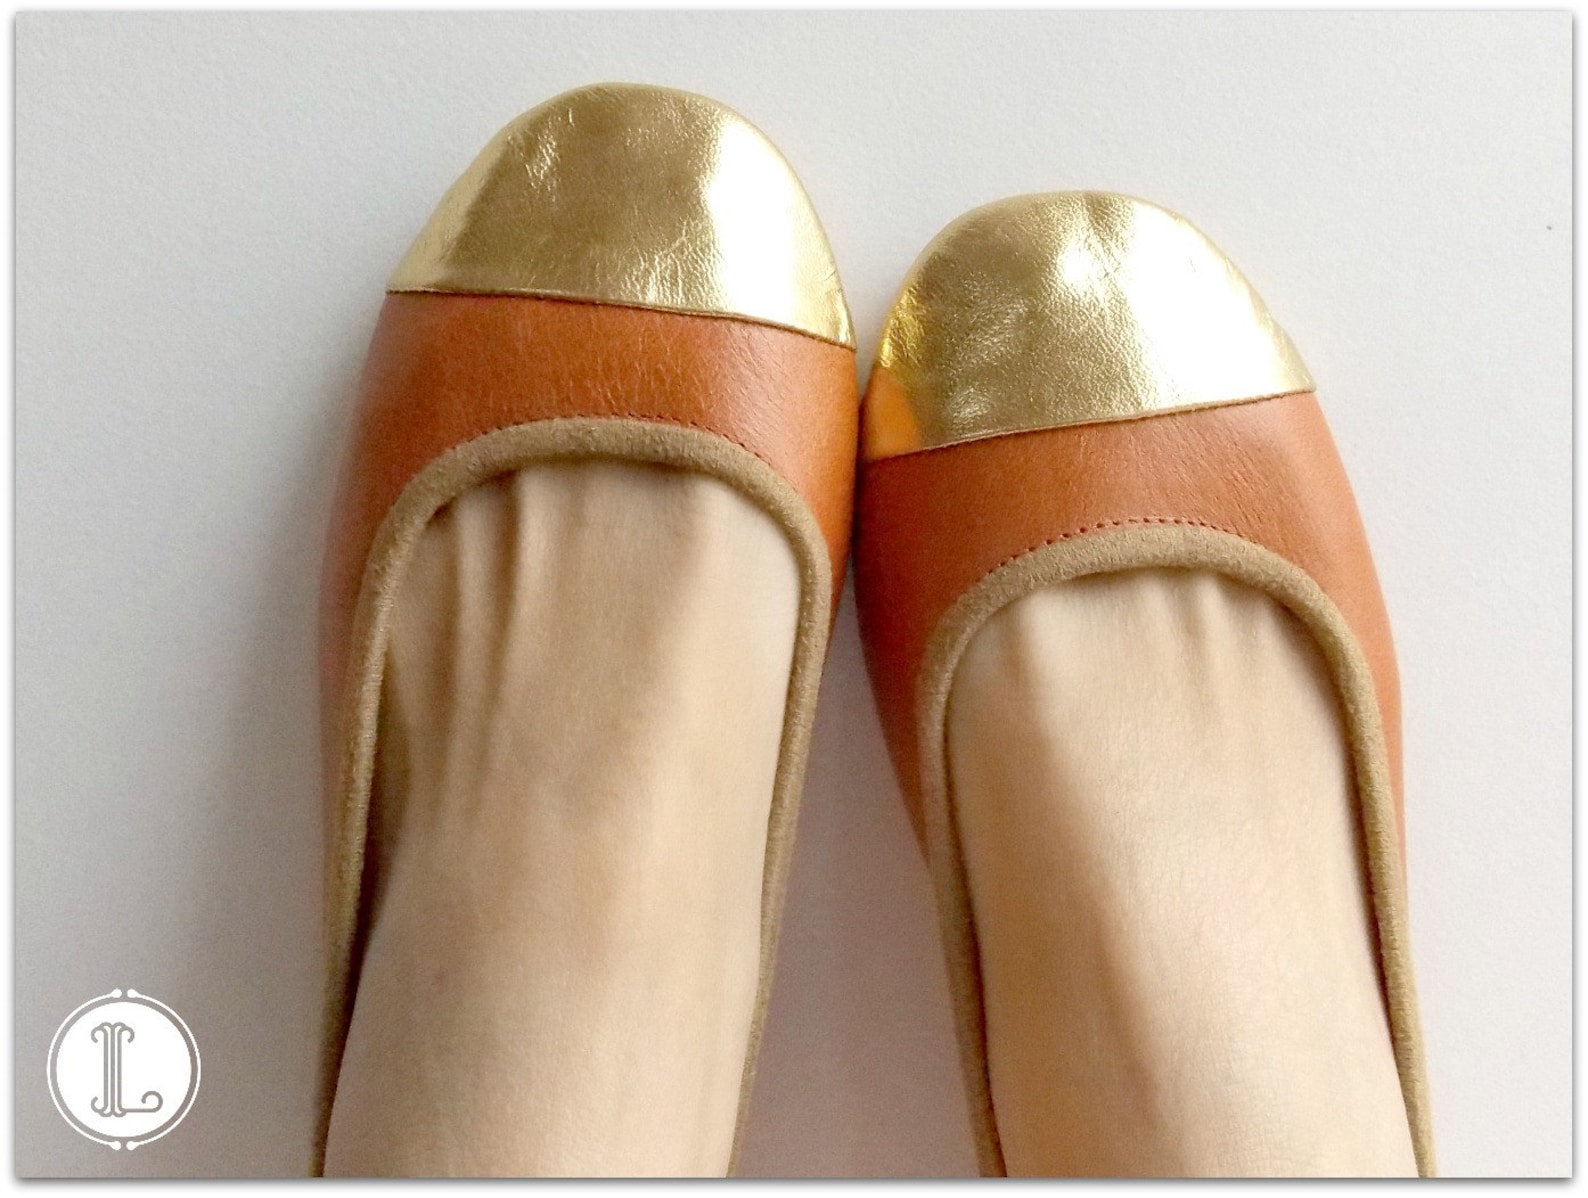 zoe. ballet flats - leather shoes - tan & gold leather. available in different sizes